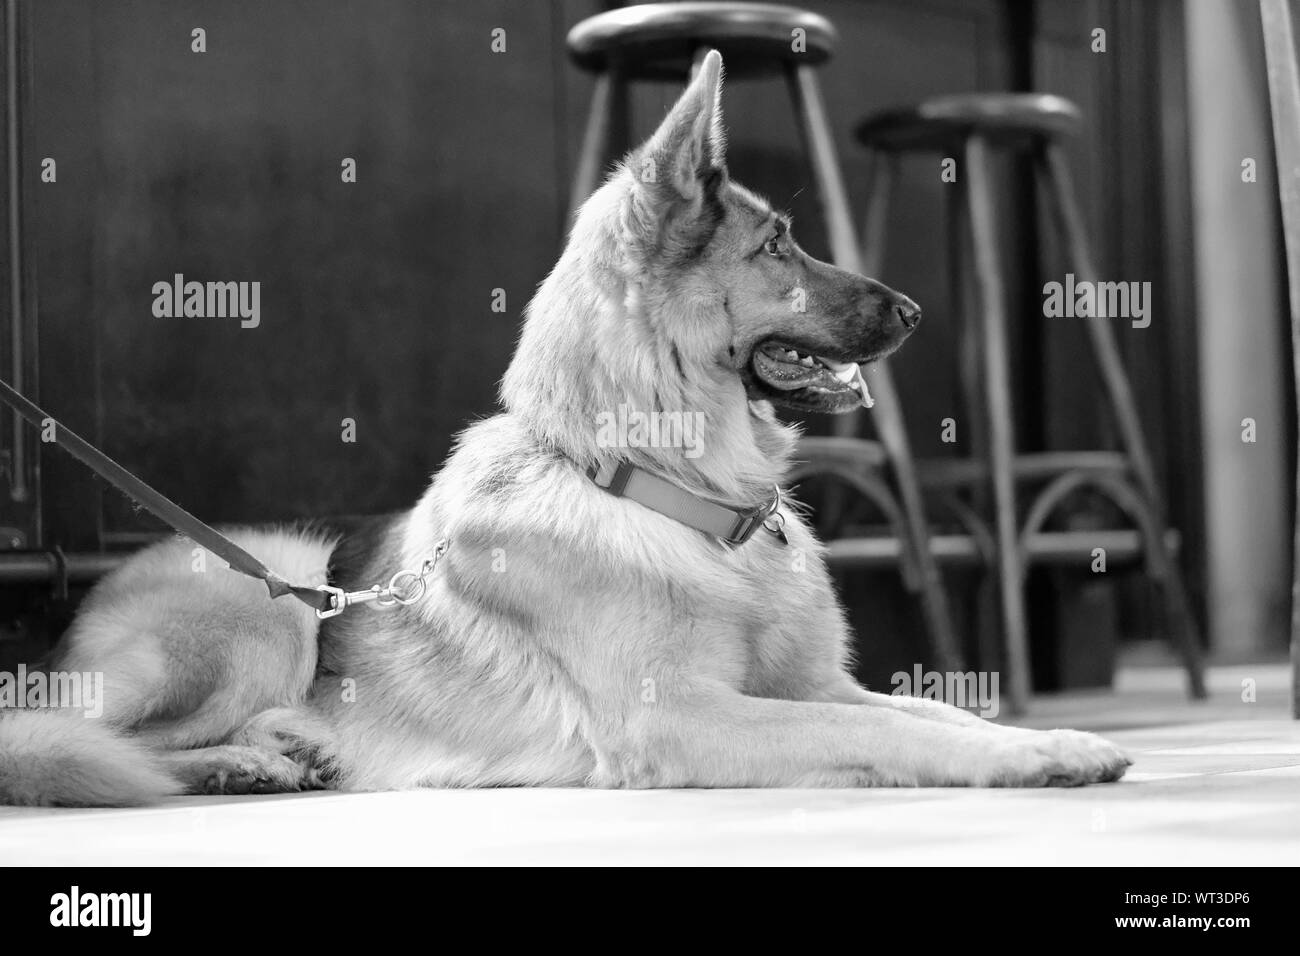 A dog sits on the floor in a cafe room amongst the wooden furniture Stock Photo